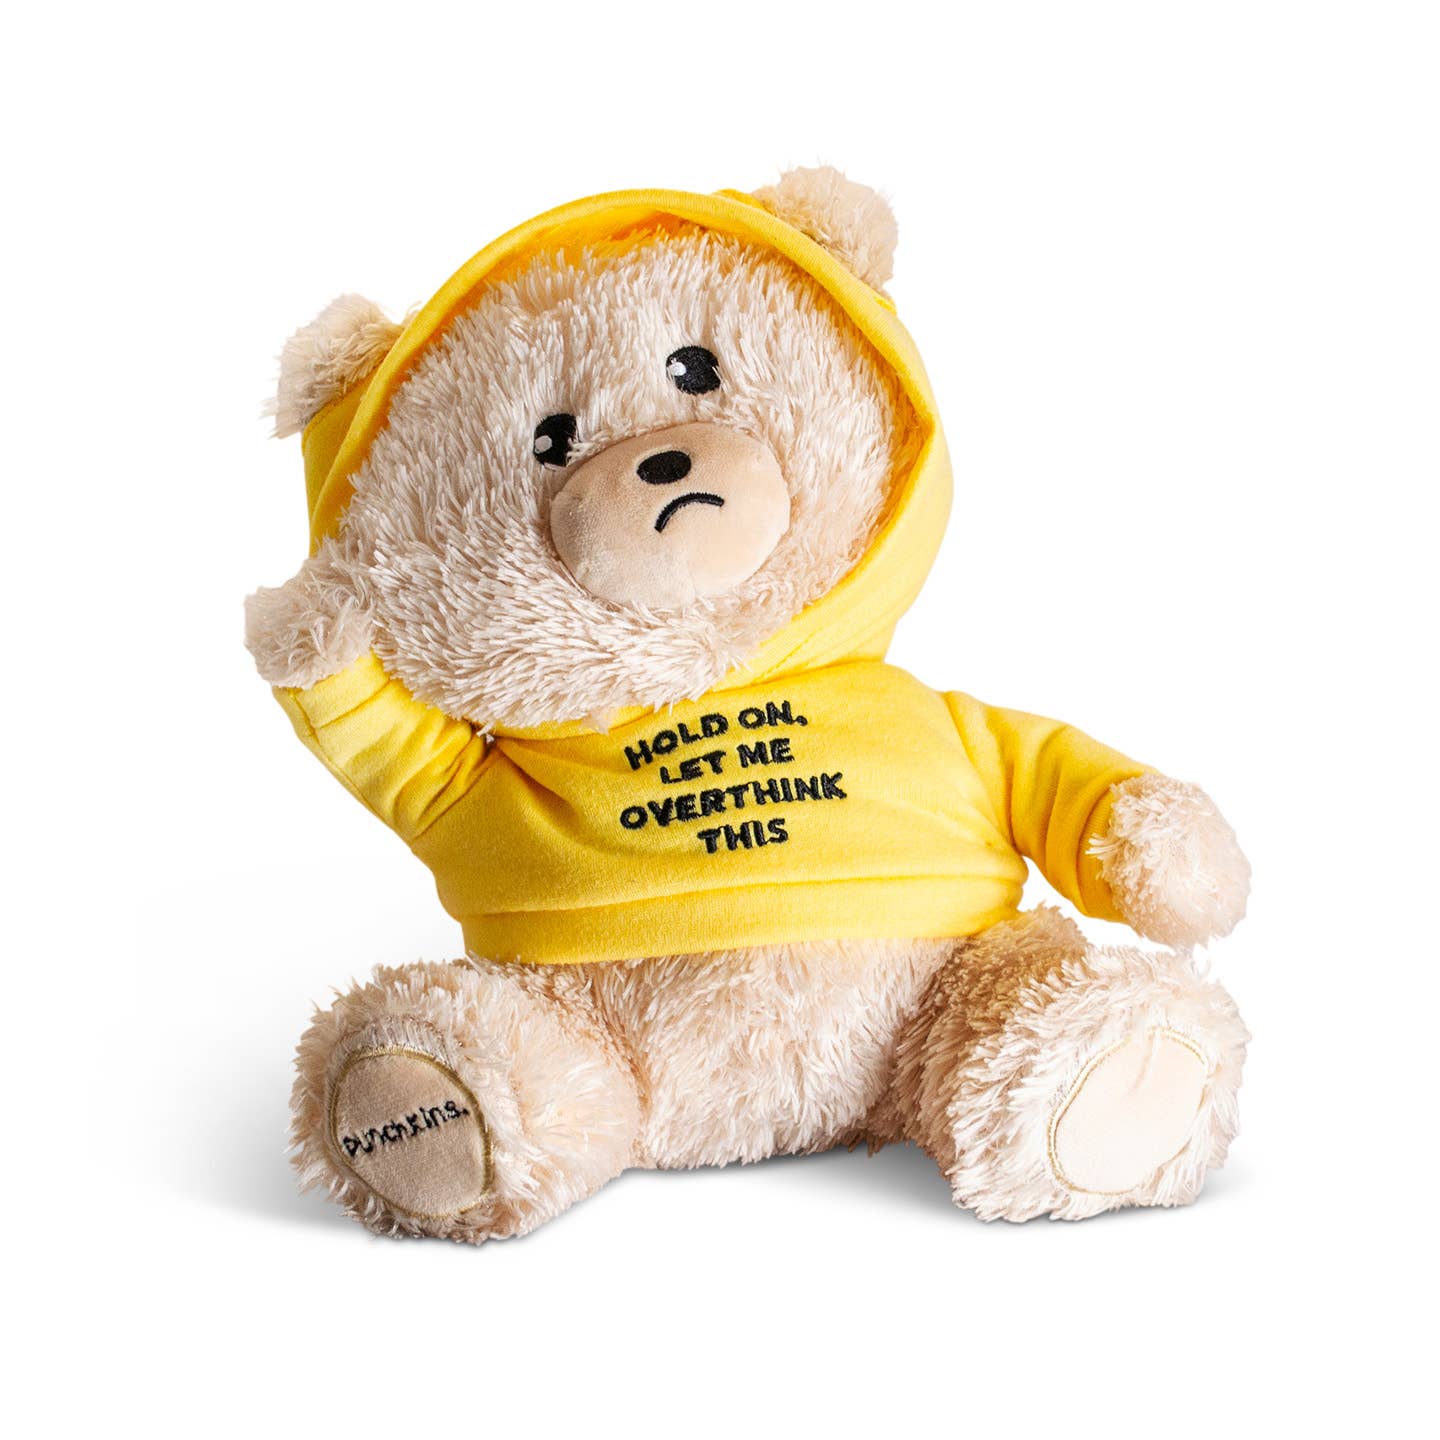 Punchkins Introverted Teddy Bear Plushie, Funny Gag Gift for Friends Kawaii Gifts 850042202739